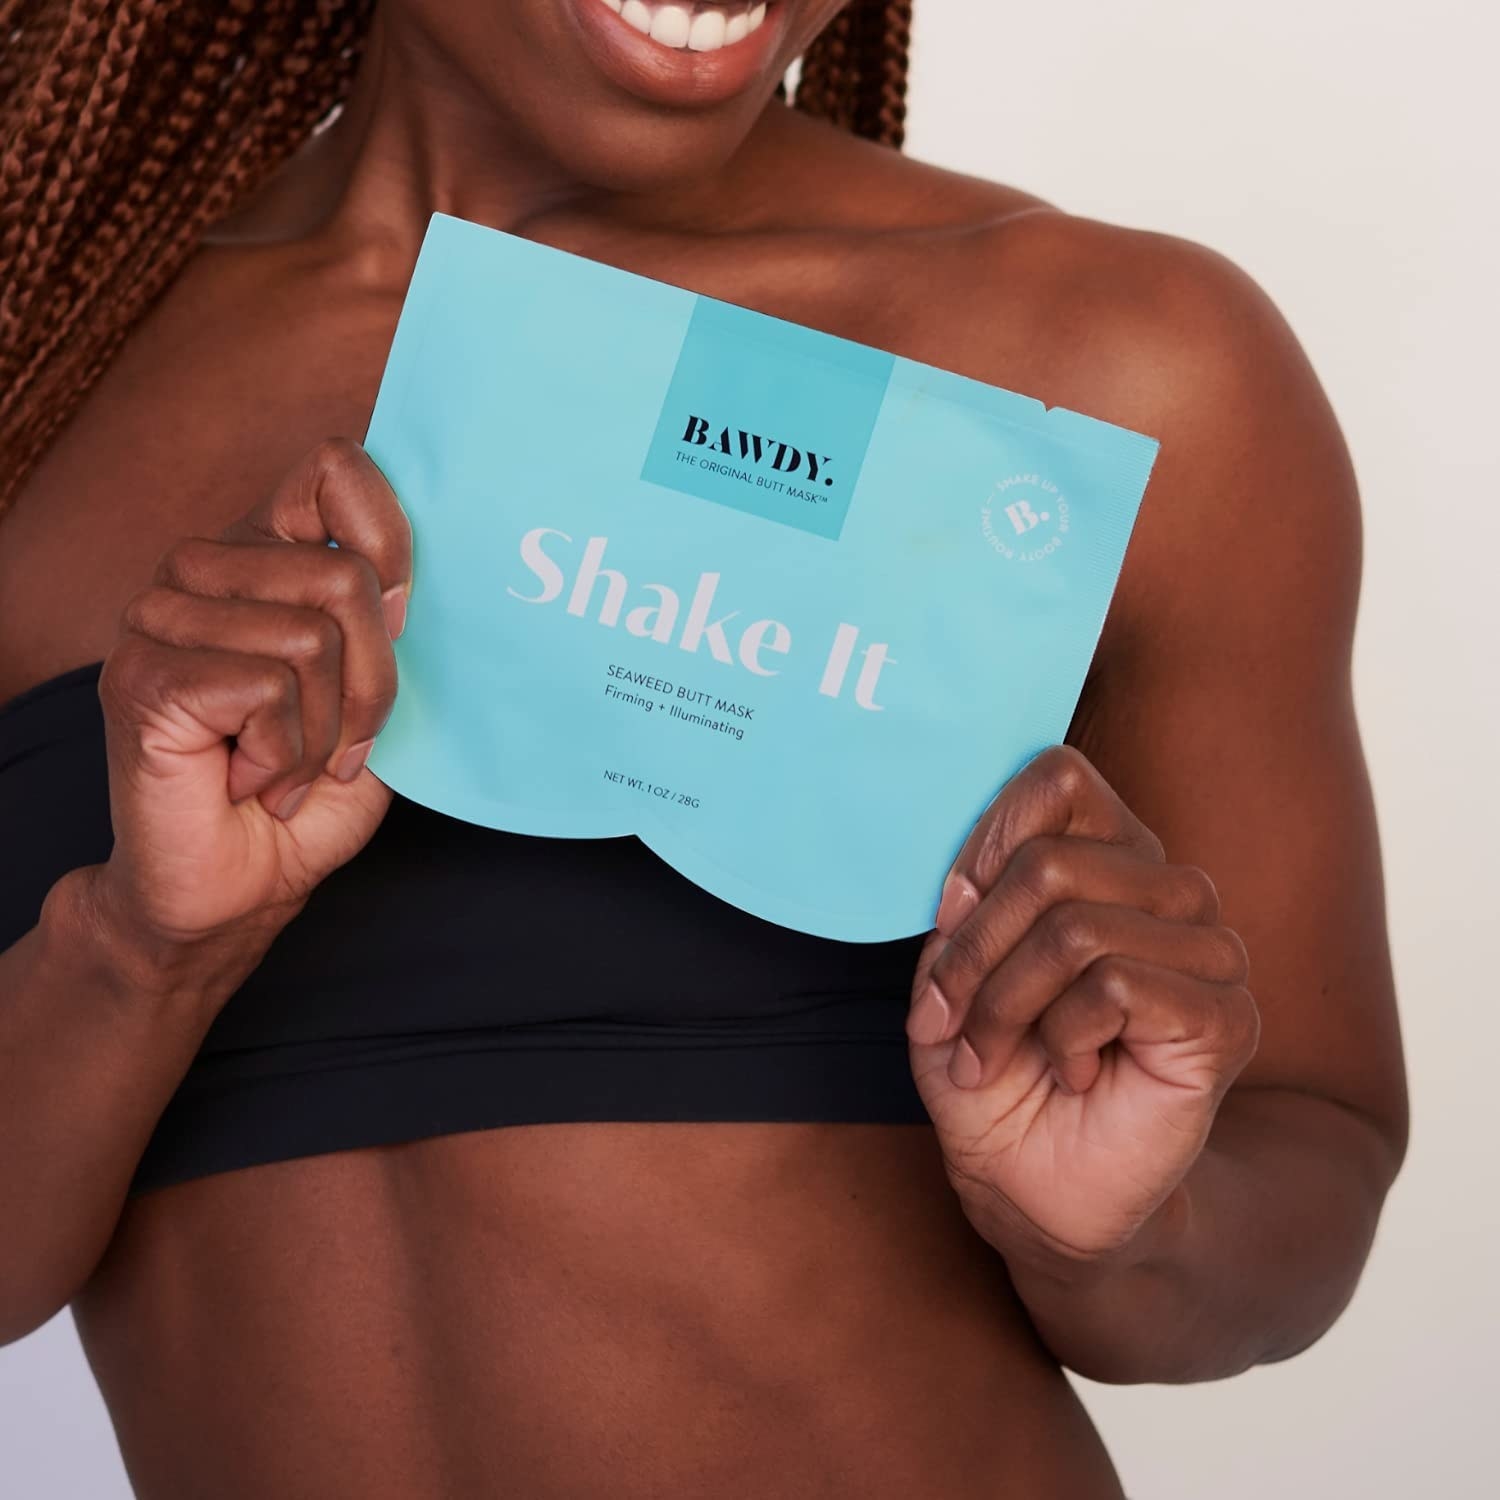 Model holding up the shake it butt mask